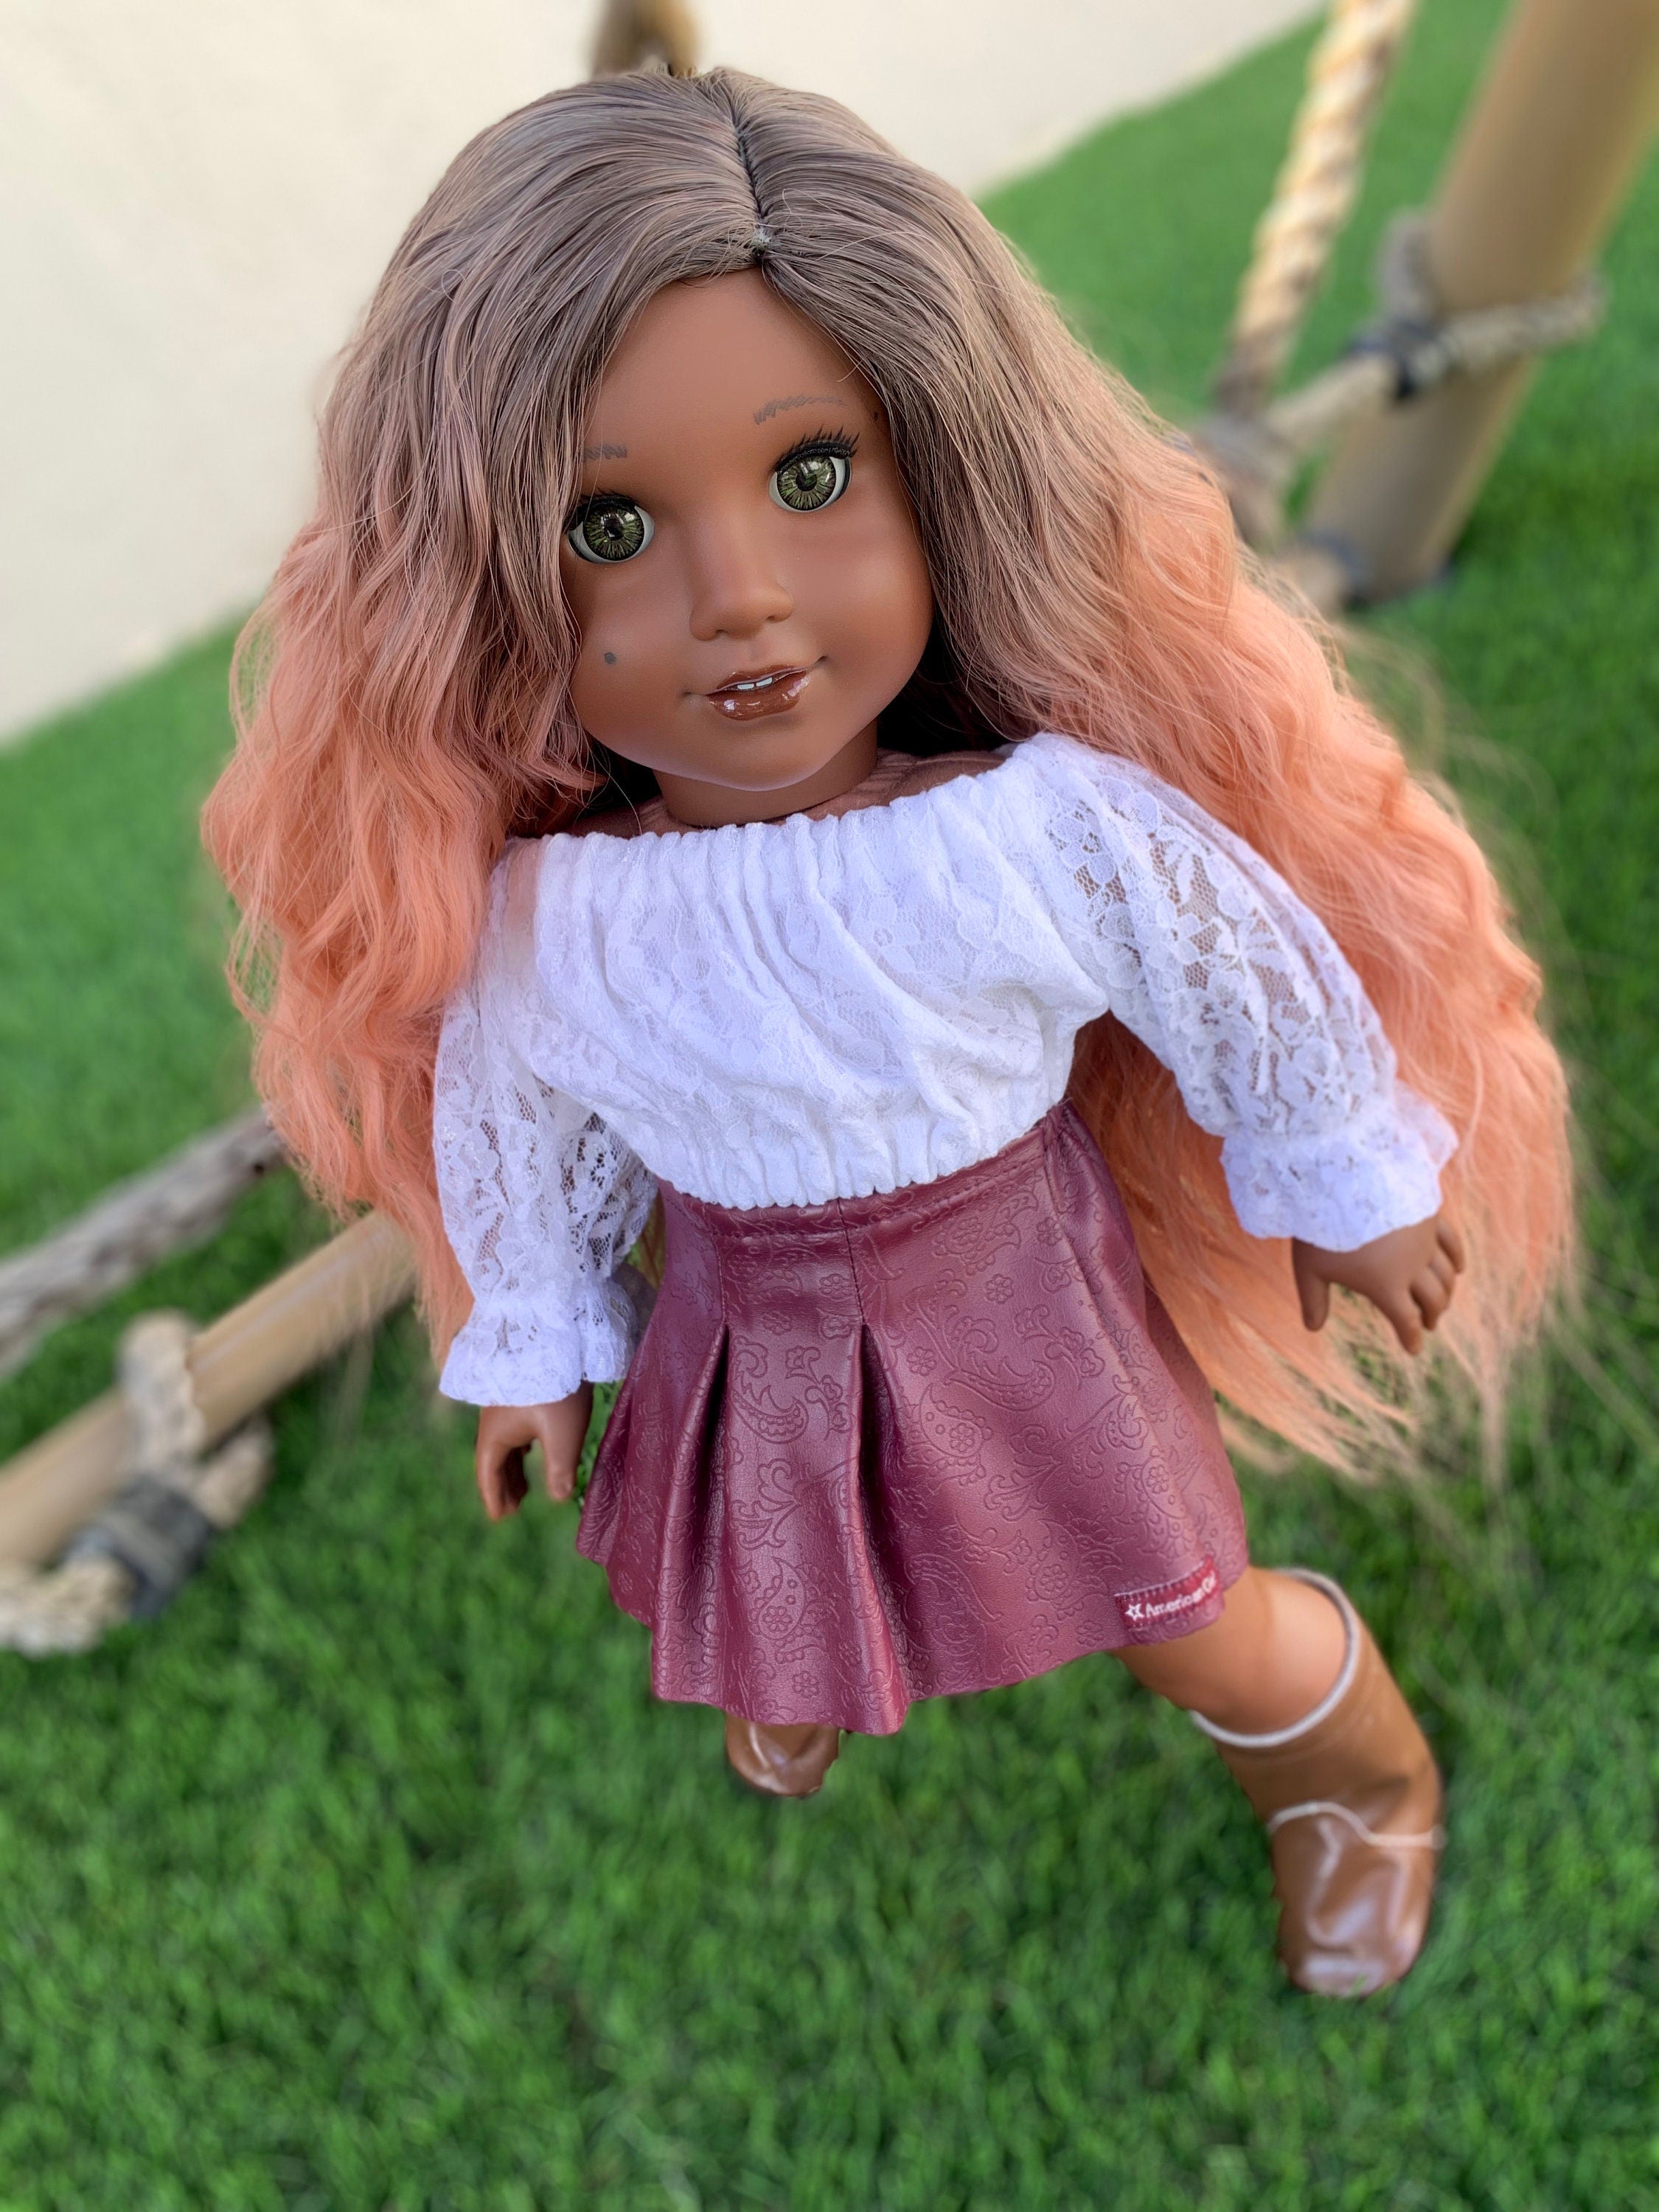 Custom doll wig for 18" American Girl Dolls - Heat Safe - Tangle Resistant - fits 10-11" head size of 18" dolls  Blythe BJD Gotz ombre